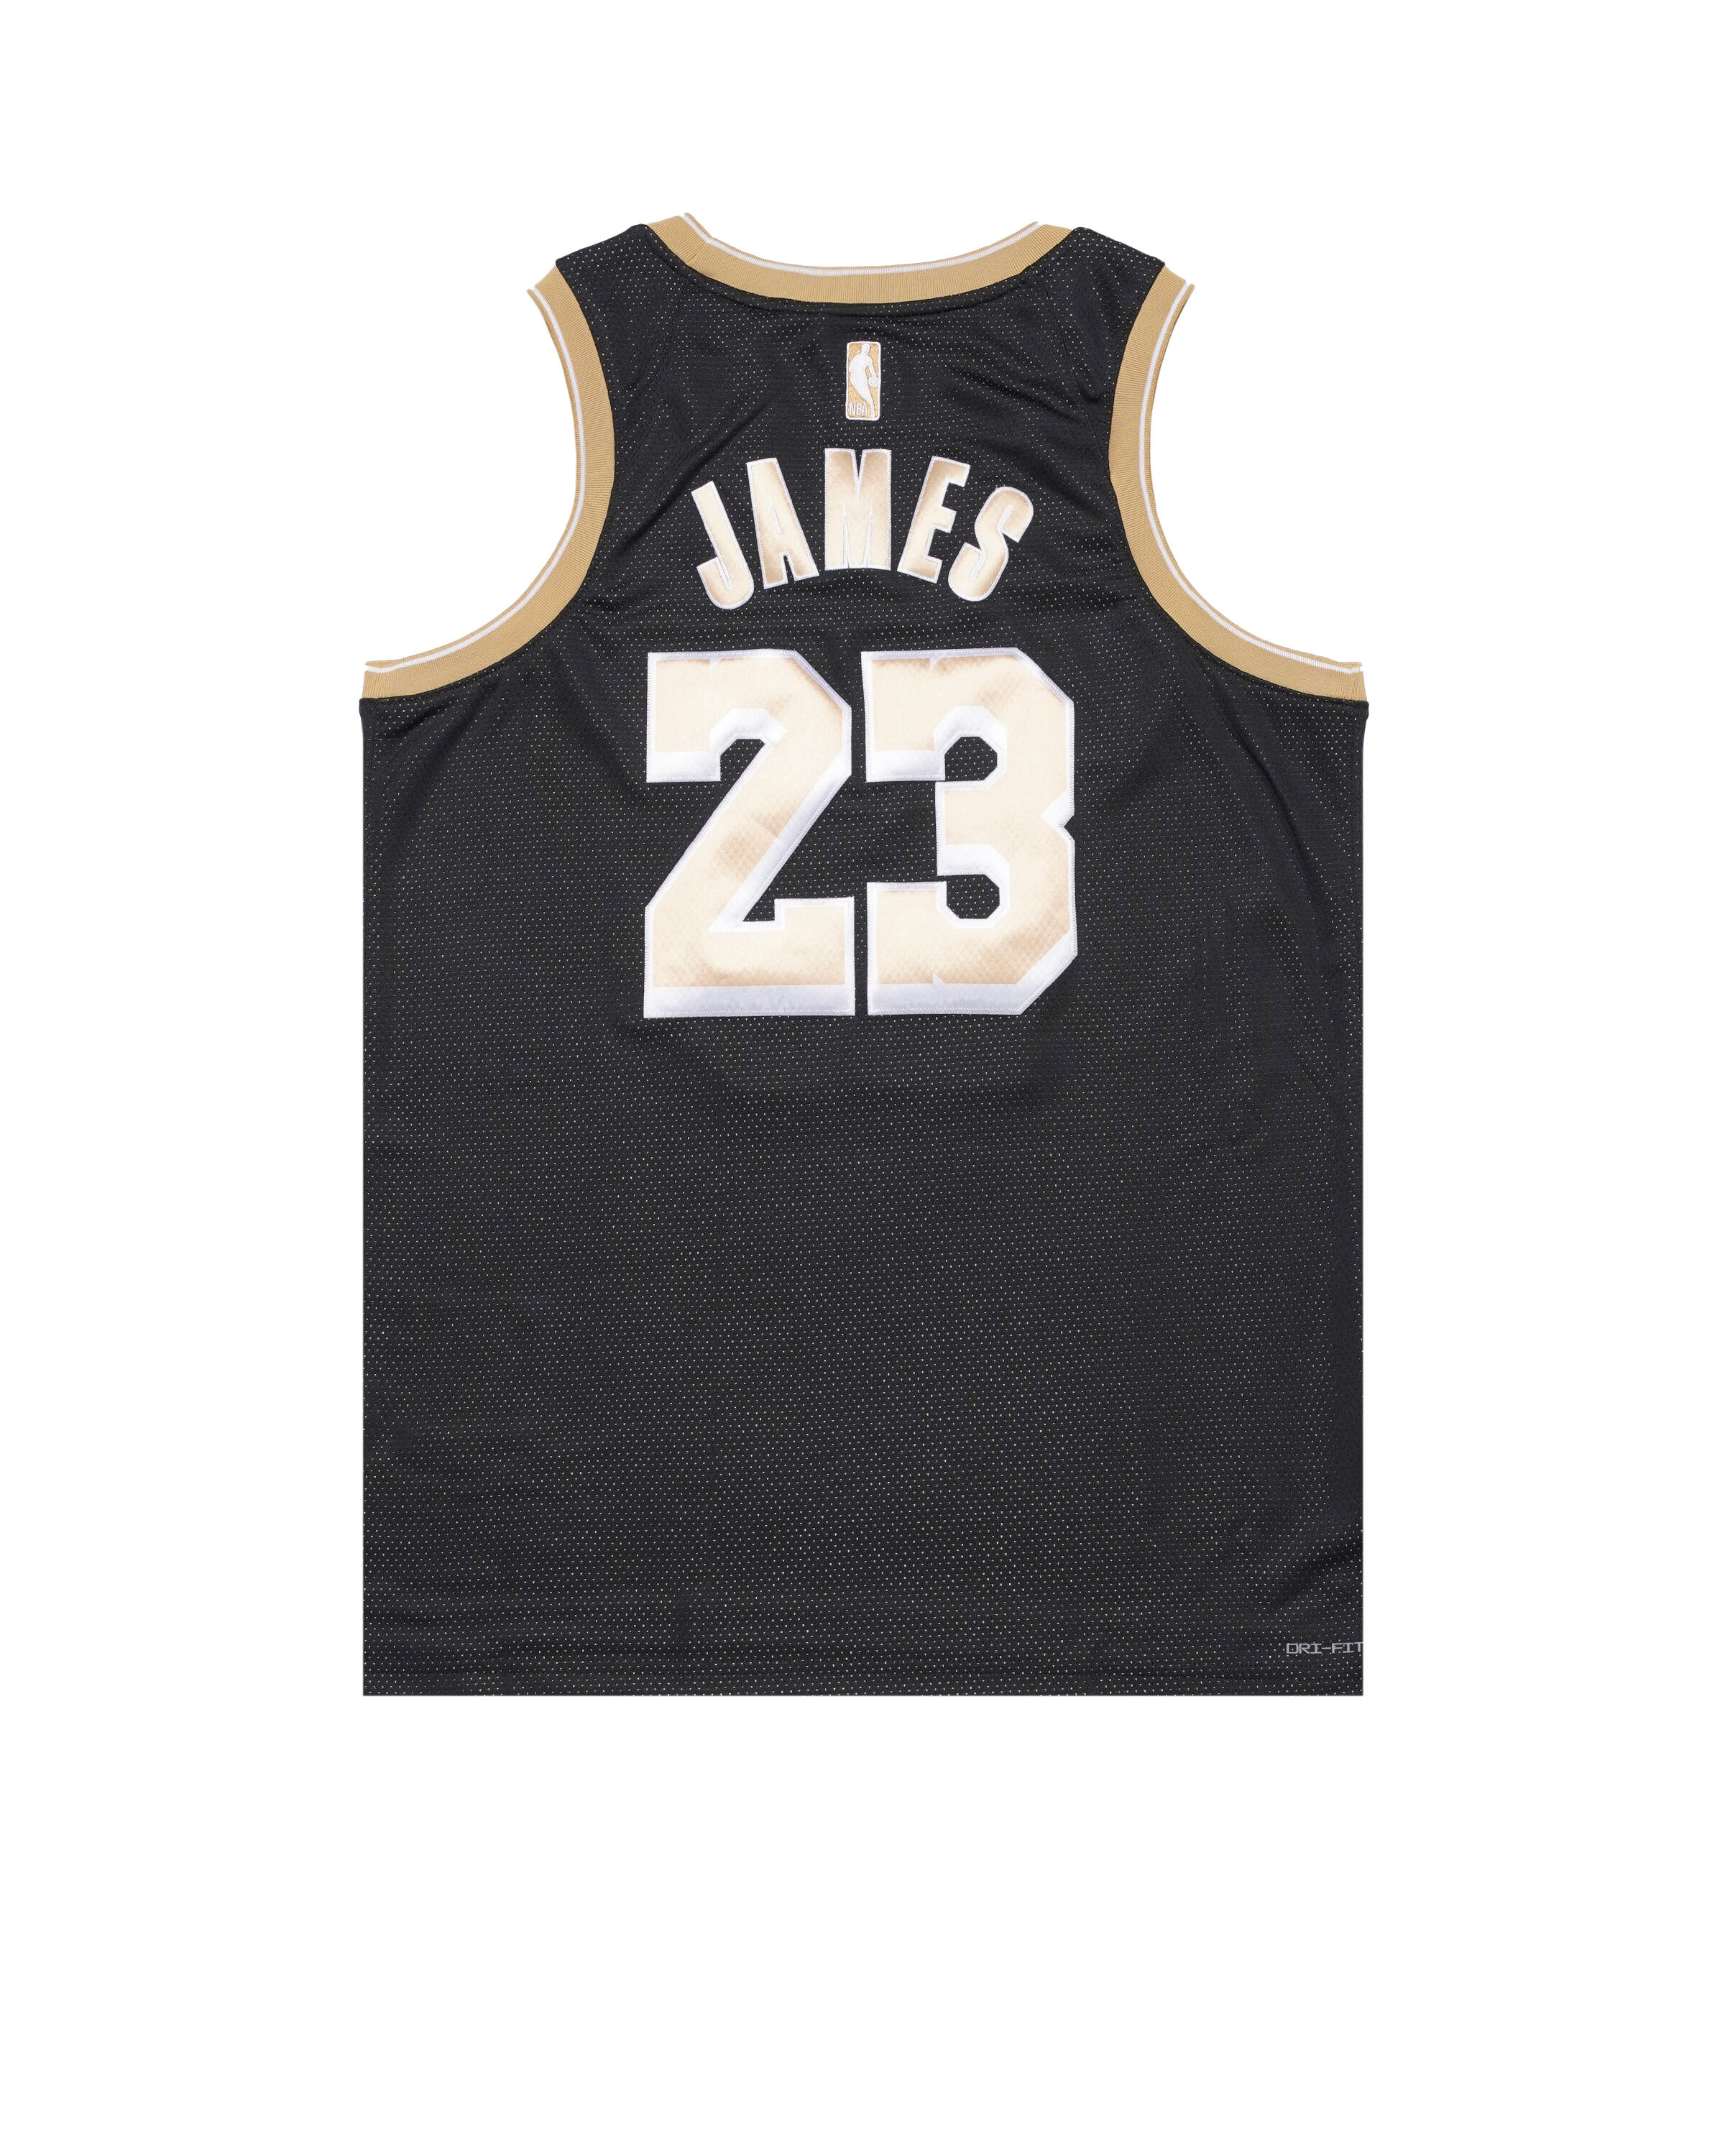 Nike Jersey - Los Angeles Lakers 'LeBron James'